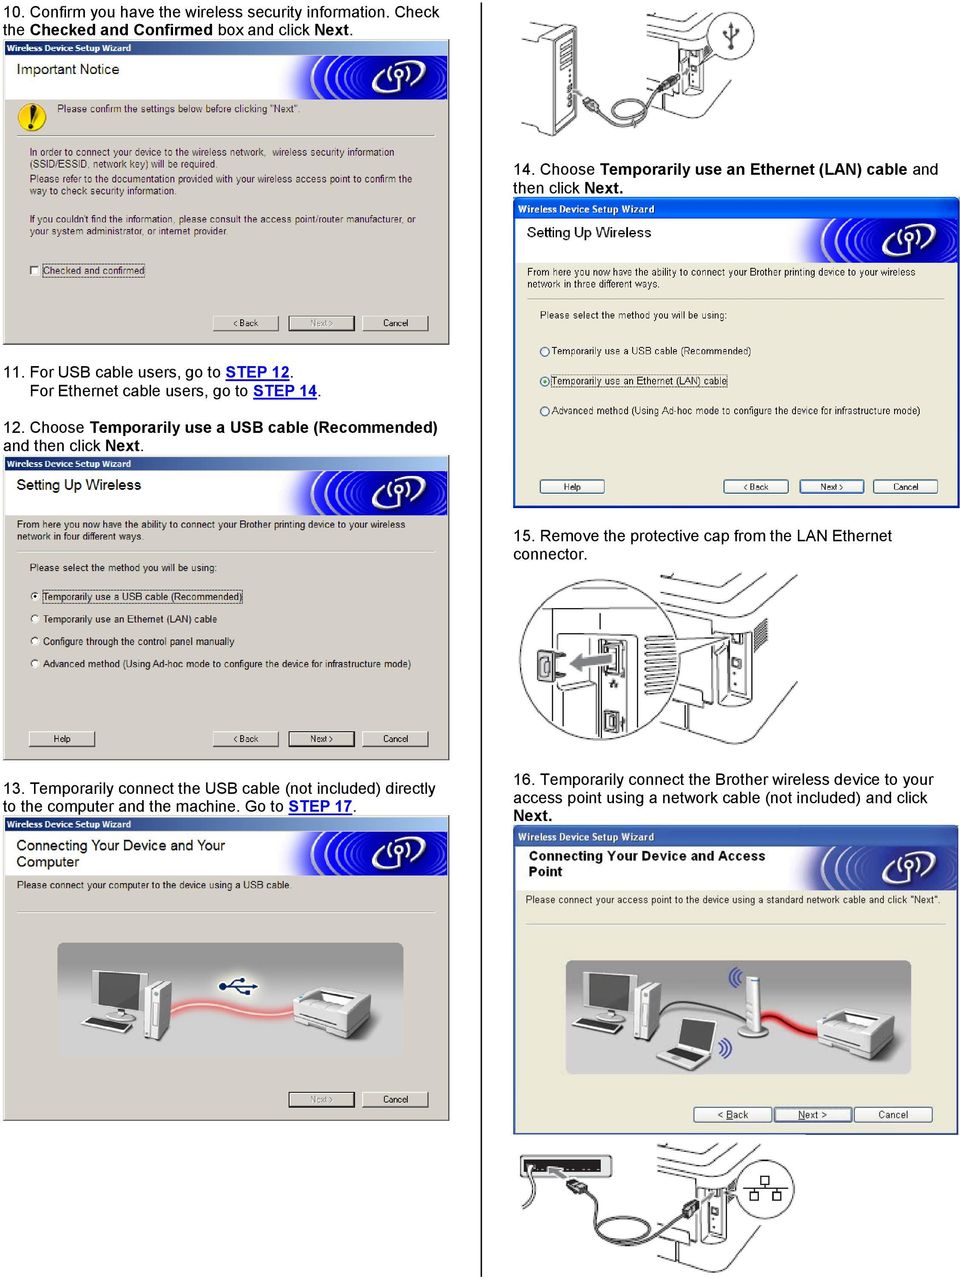 For Ethernet cable users, go to STEP 14. 12. Choose Temporarily use a USB cable (Recommended) and then click Next. 15.